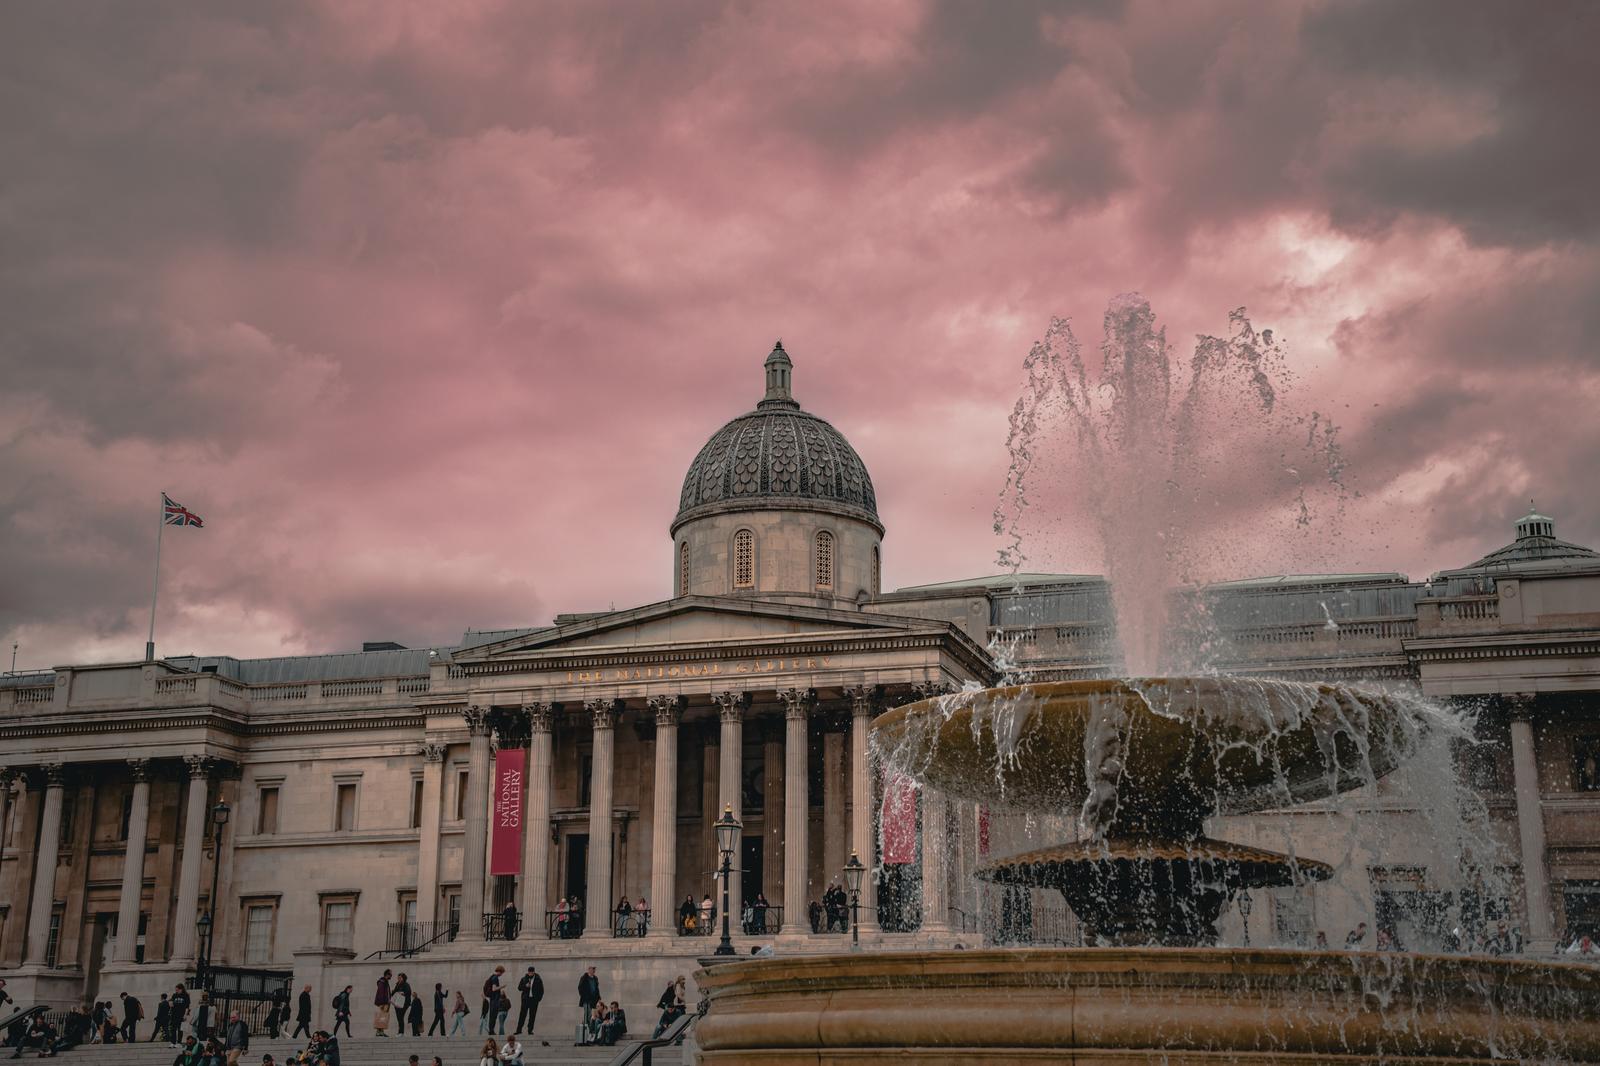 Plan a Trip to London If You Want to Know When You’ll Meet Your Soulmate ❤️ The National Gallery, London